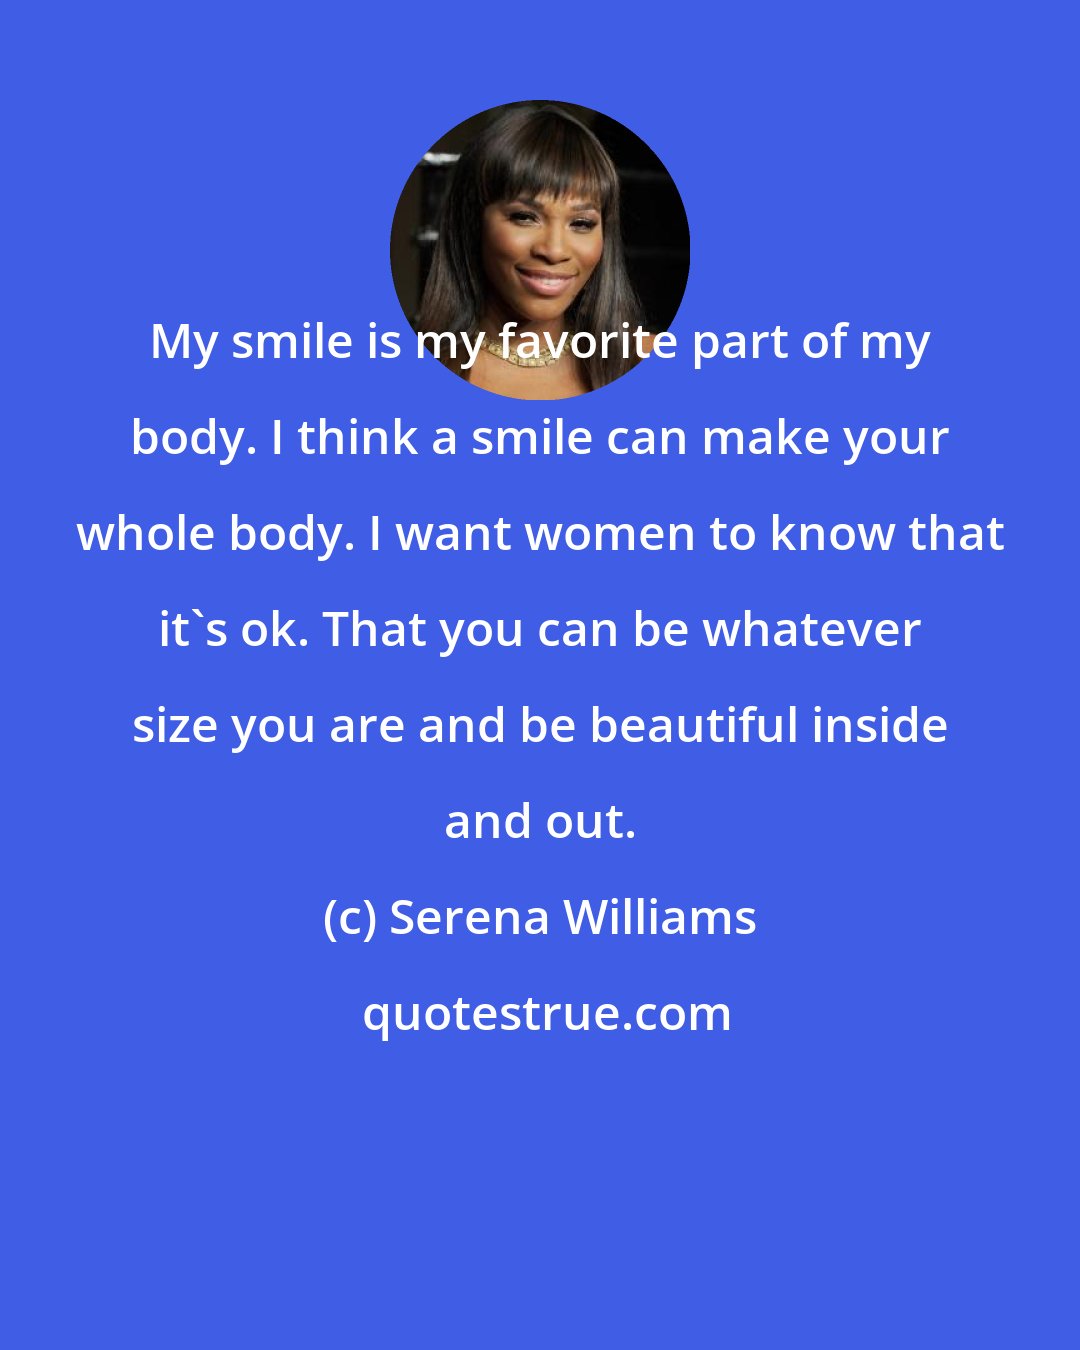 Serena Williams: My smile is my favorite part of my body. I think a smile can make your whole body. I want women to know that it's ok. That you can be whatever size you are and be beautiful inside and out.